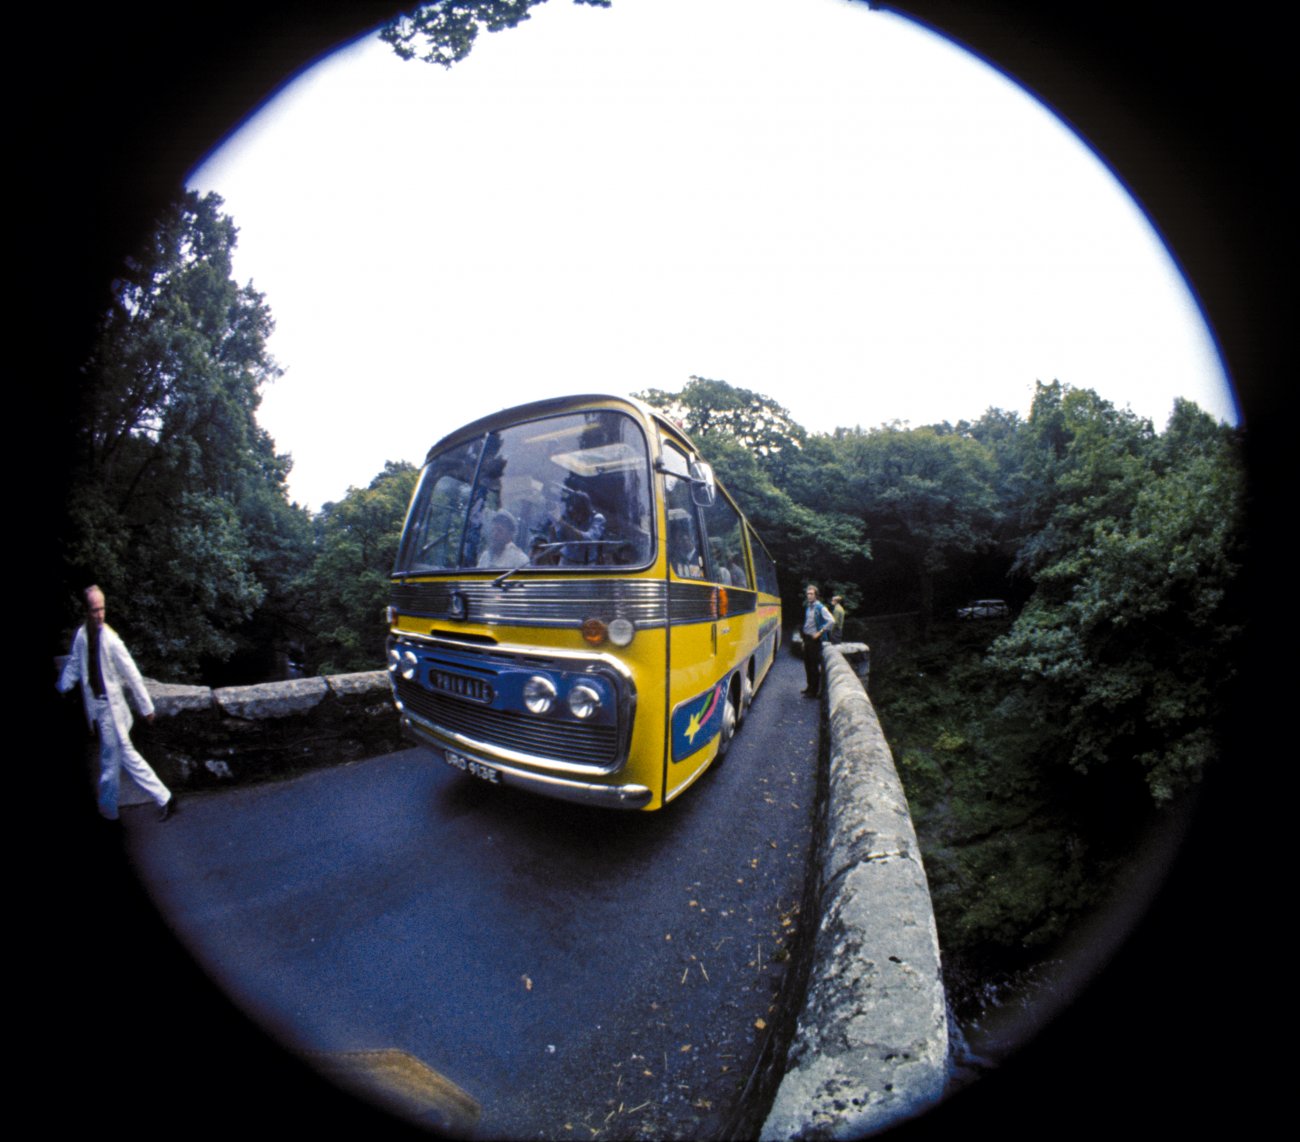 The Magical Mystery Tour bus